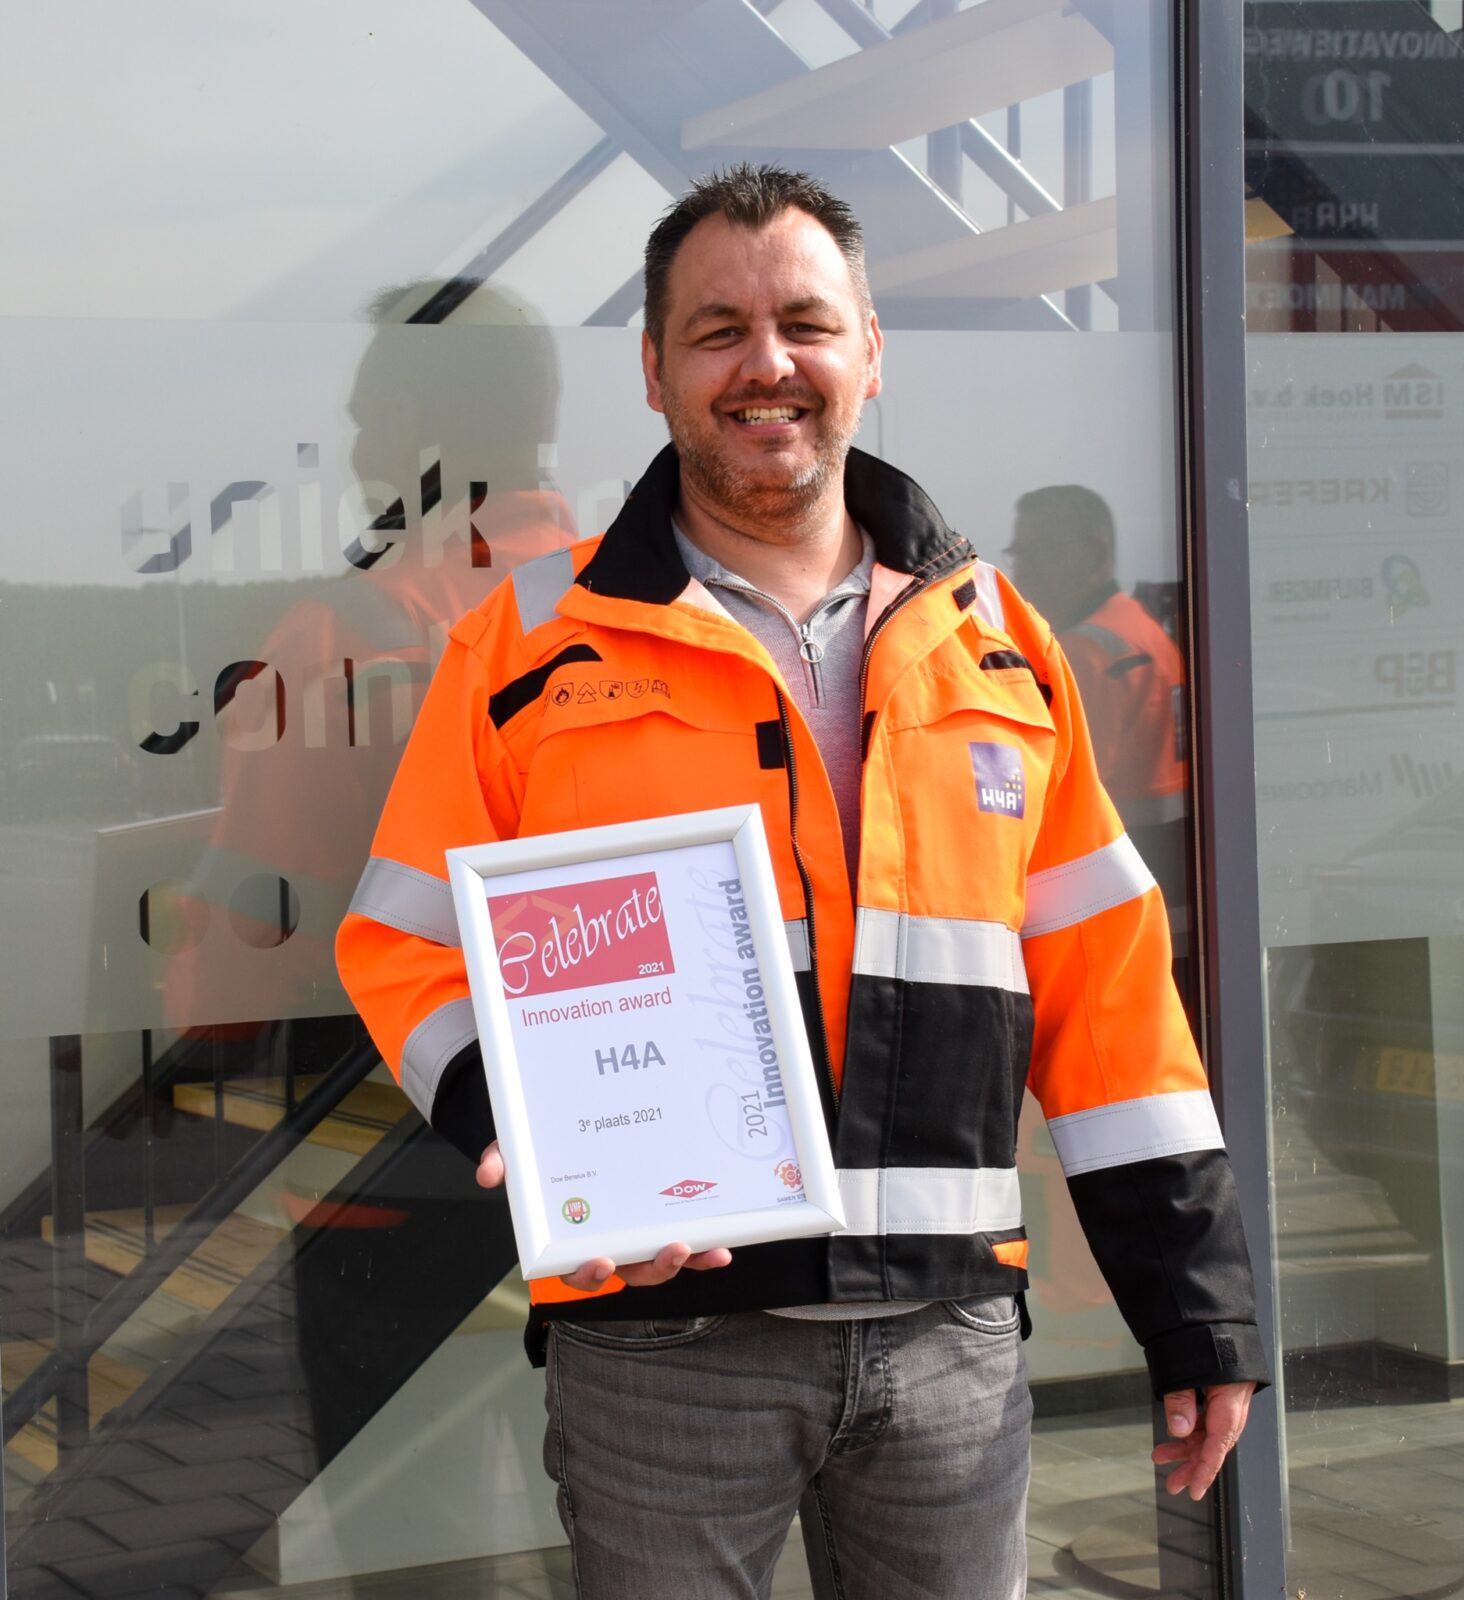 DOW Award voor H4A Industrie Service